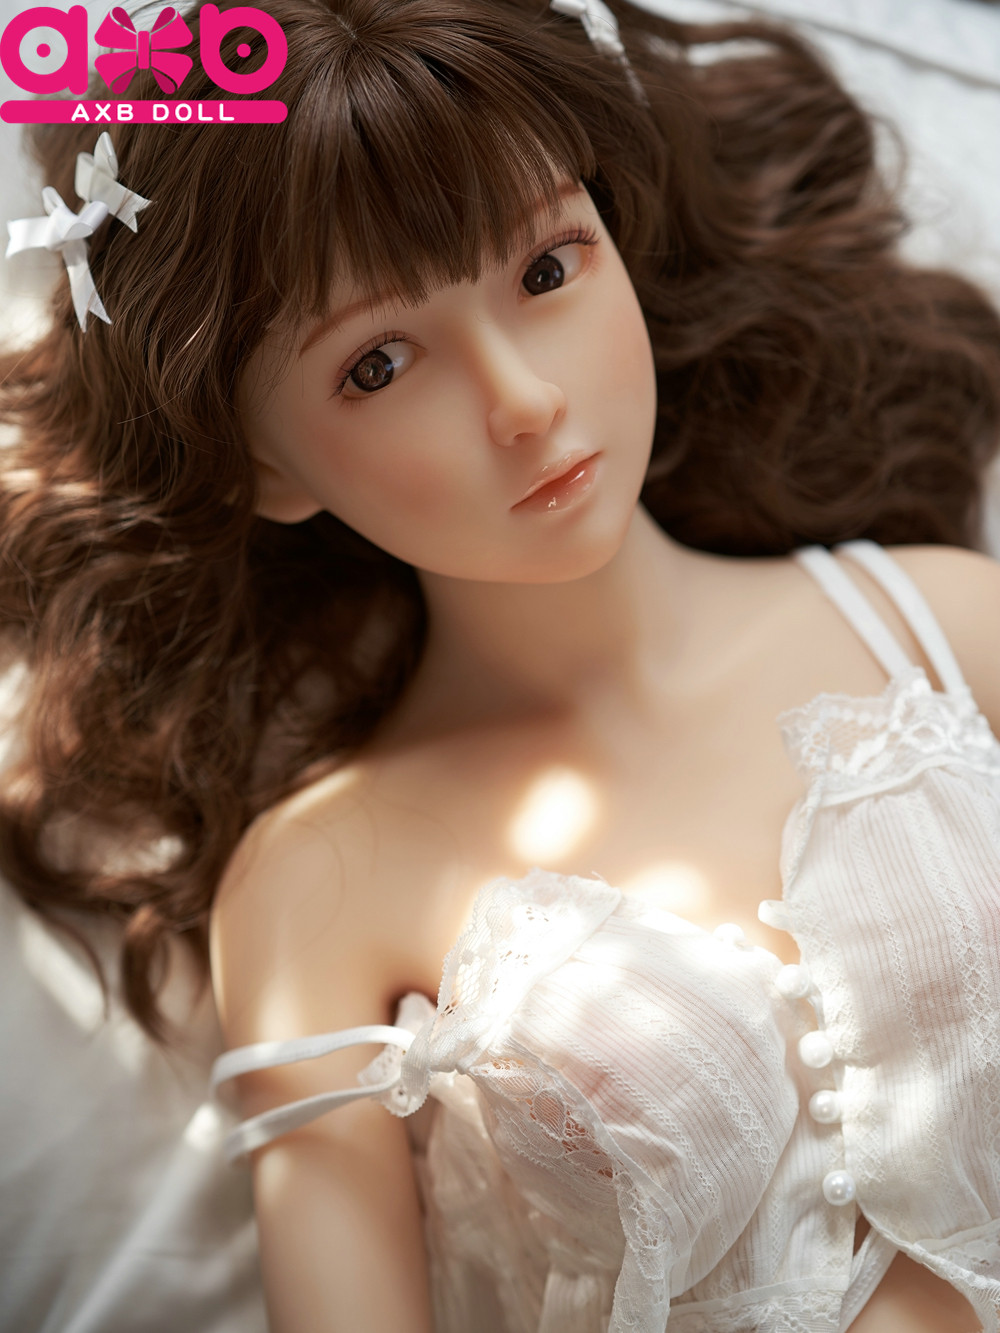 AXBDOLL 130cm A16# TPE Anime Oral Love Doll Sex Product For Men - 画像をクリックして閉じます